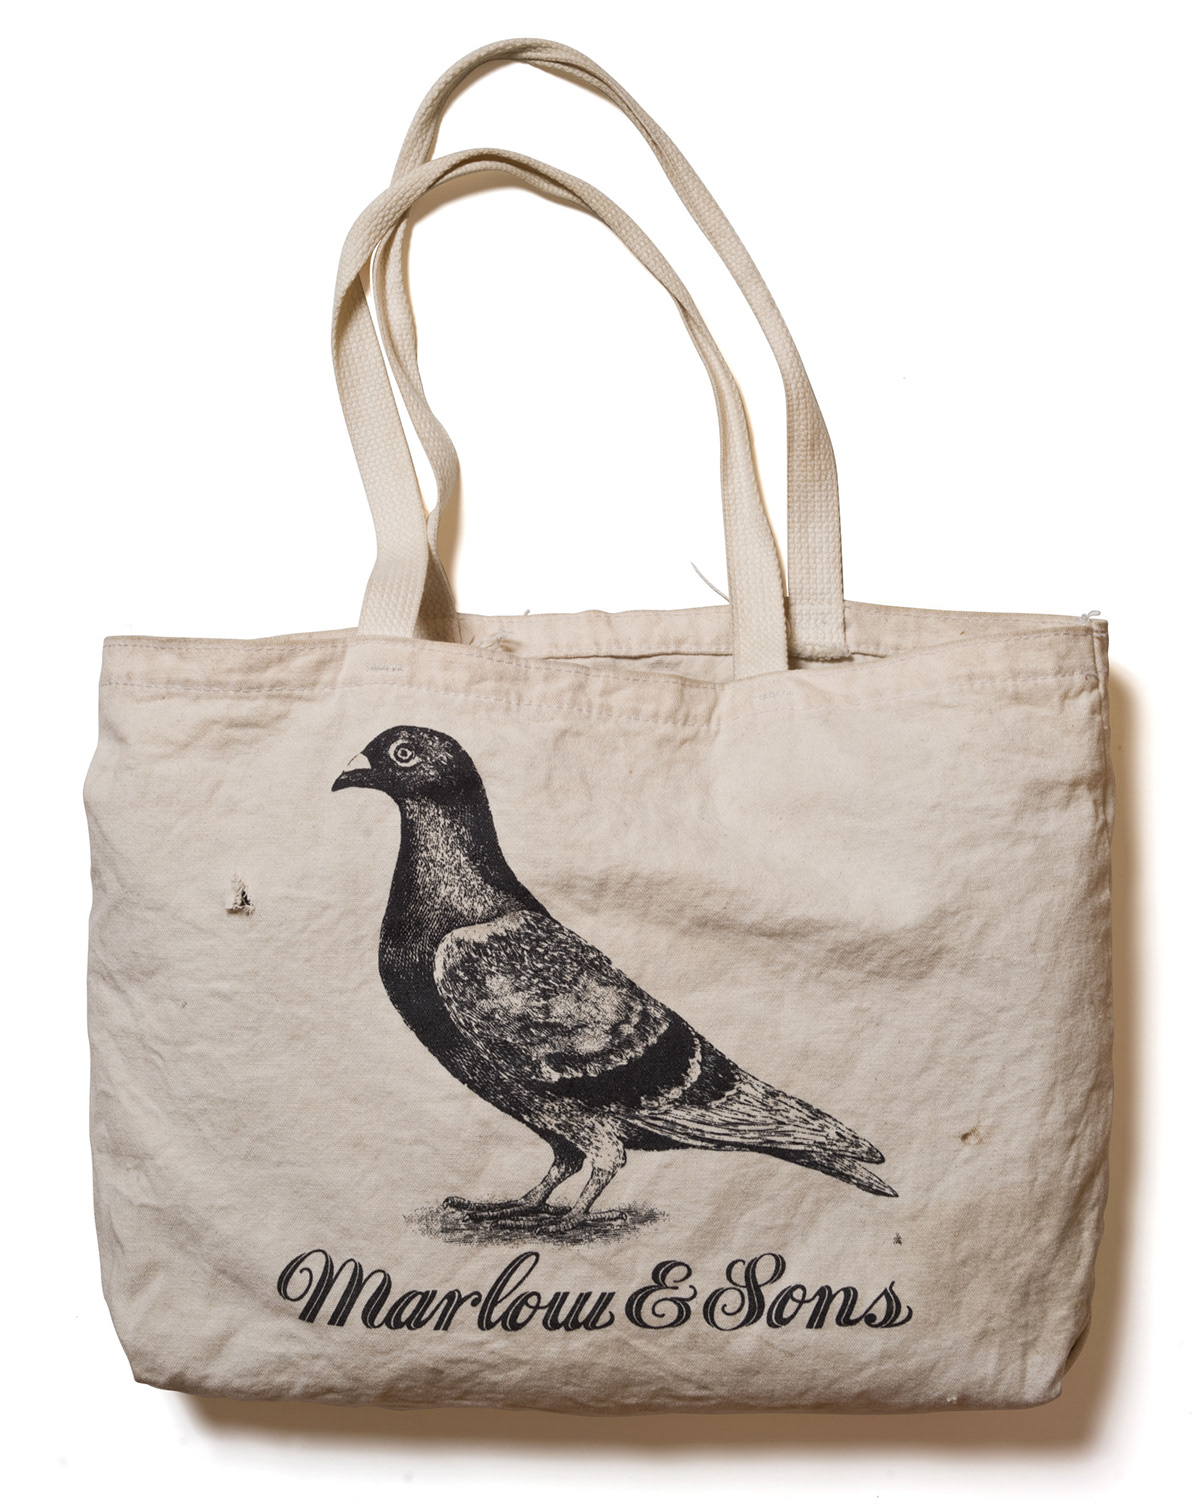 MARLOW AND DAUGHTERS Tote butcher shop tote Marlow and Sons